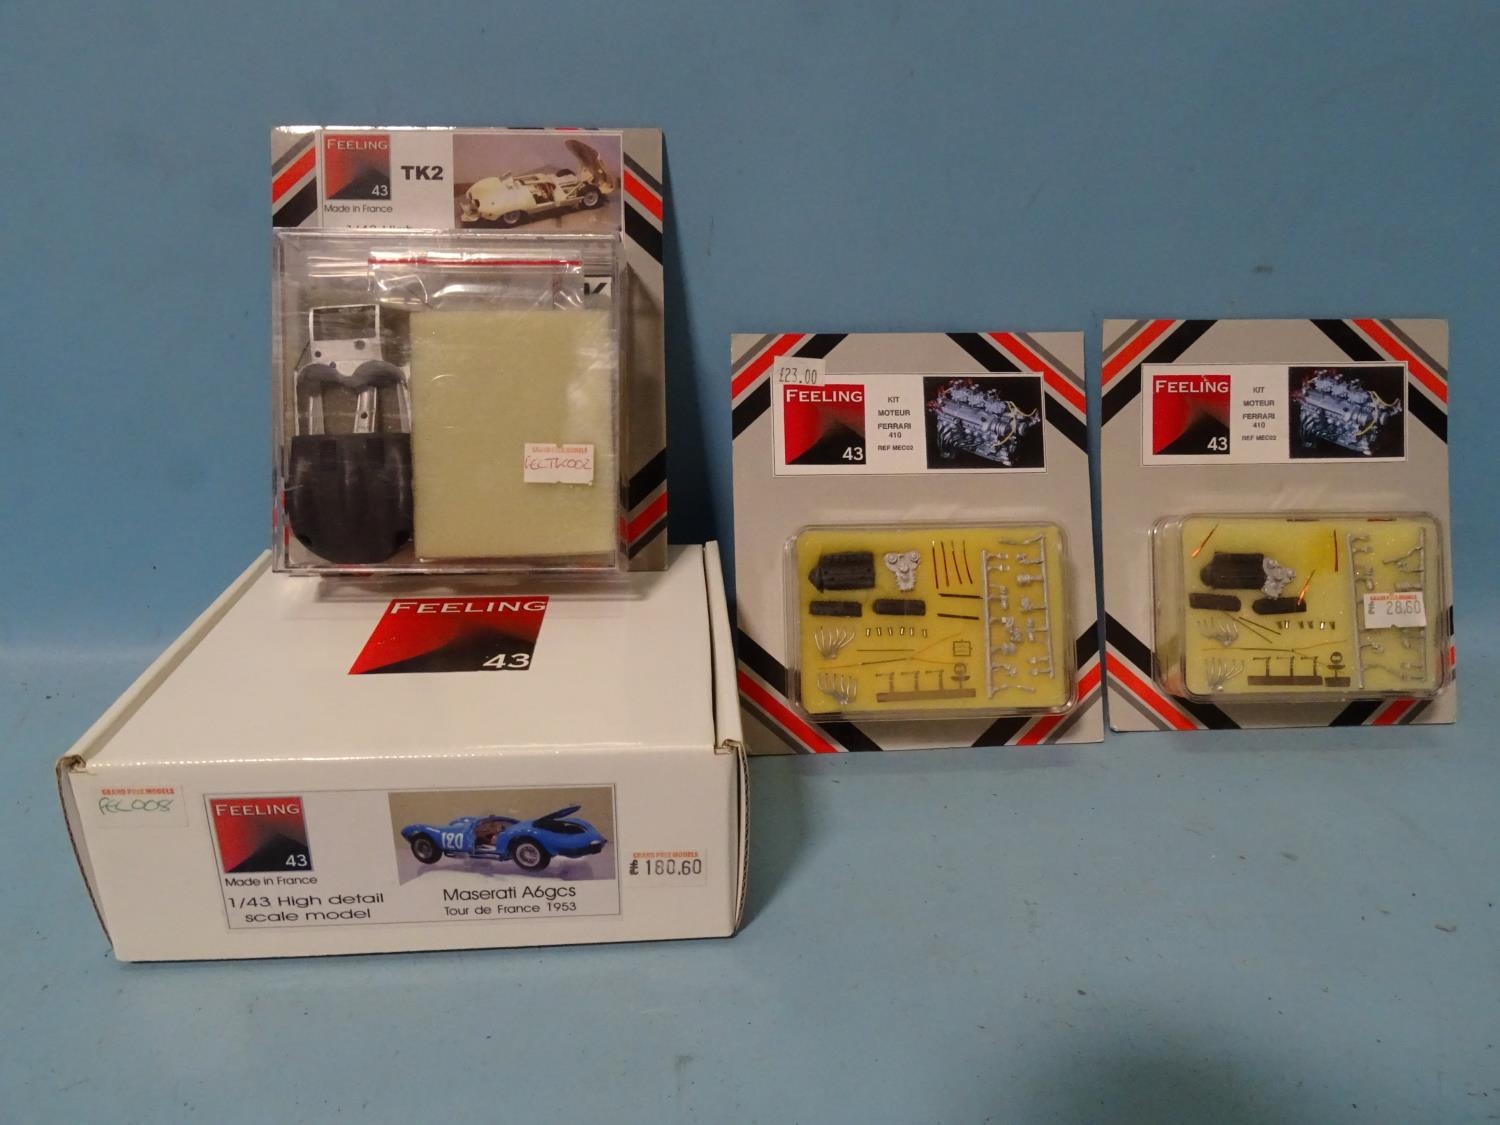 Two Feeling 43 1/43 scale white metal and resin car kits: Maserati A6gcs and Jaguar Type D and two